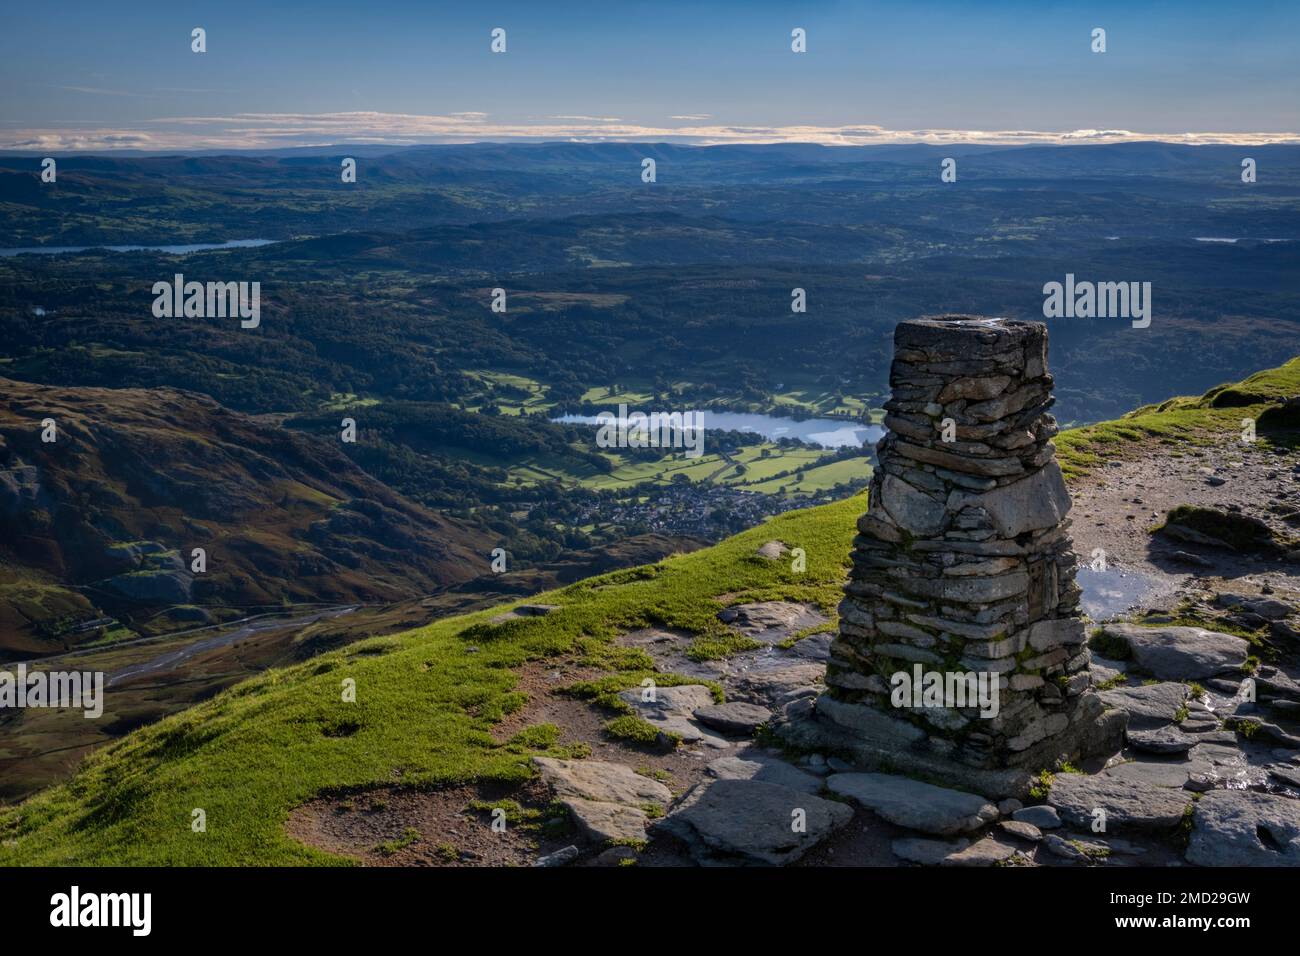 Coniston Village et Coniston Water from the Old Man of Coniston Trig point, Lake District National Park, Cumbria, Angleterre, Royaume-Uni Banque D'Images